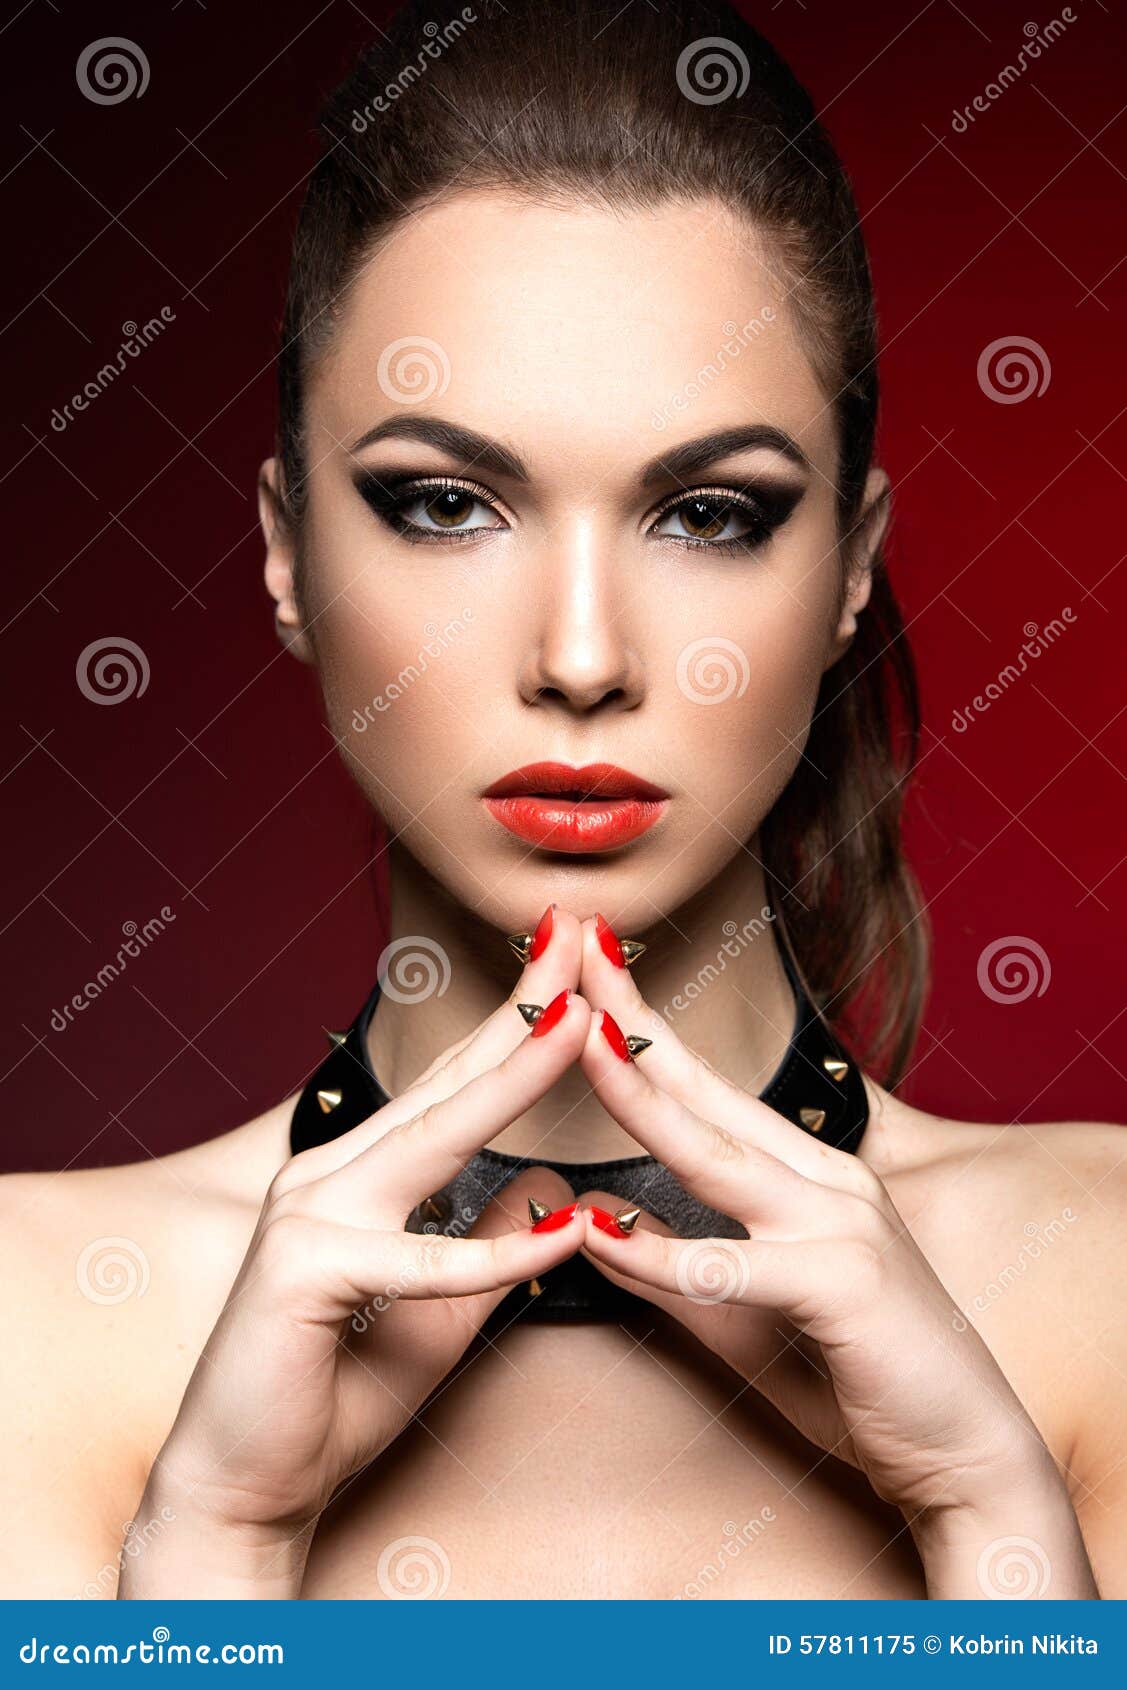 https://thumbs.dreamstime.com/z/beautiful-woman-gothic-style-evening-makeup-red-nails-thorns-picture-taken-studio-red-background-57811175.jpg